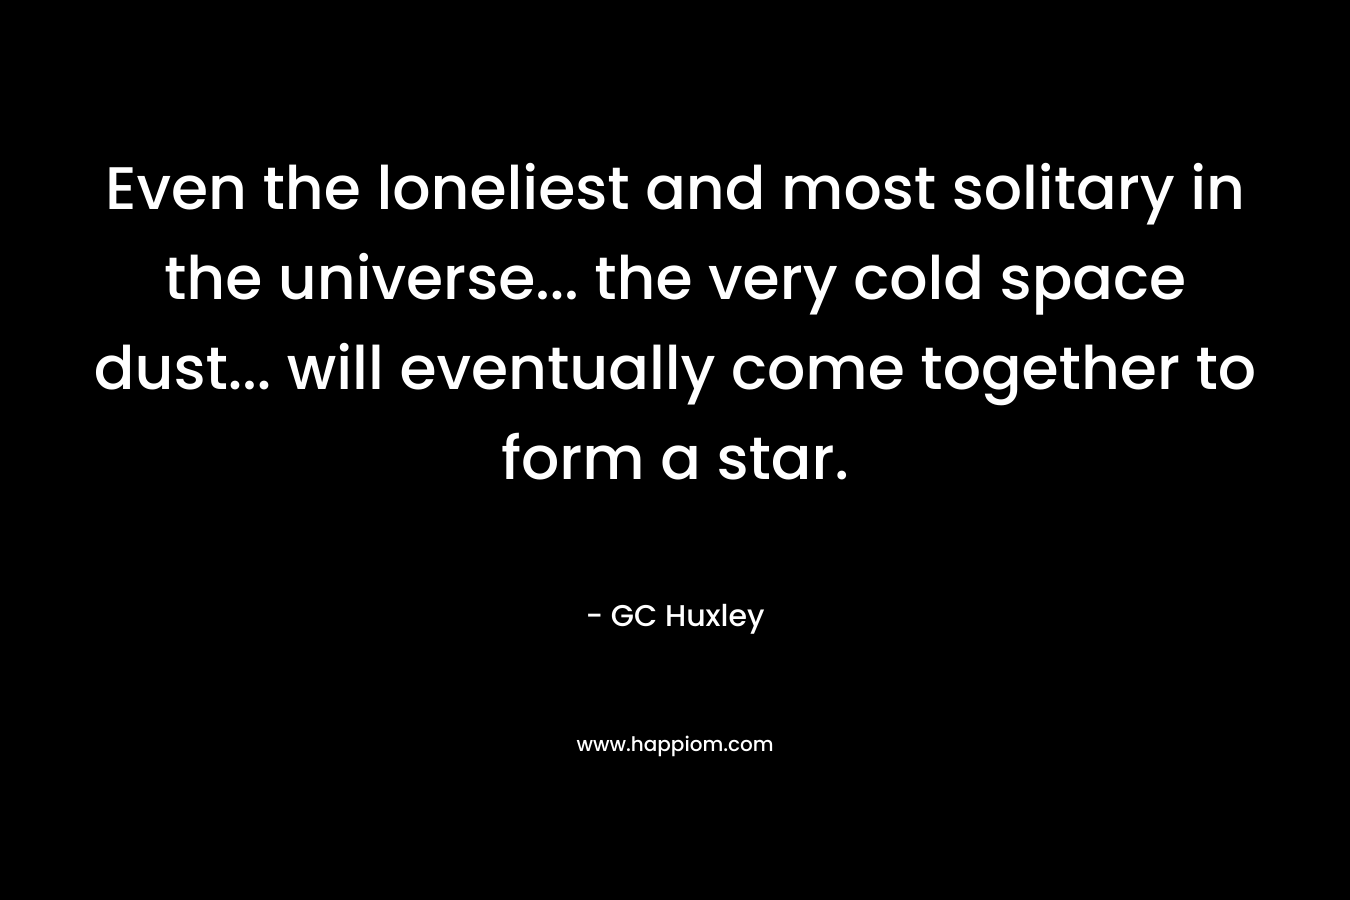 Even the loneliest and most solitary in the universe... the very cold space dust... will eventually come together to form a star.